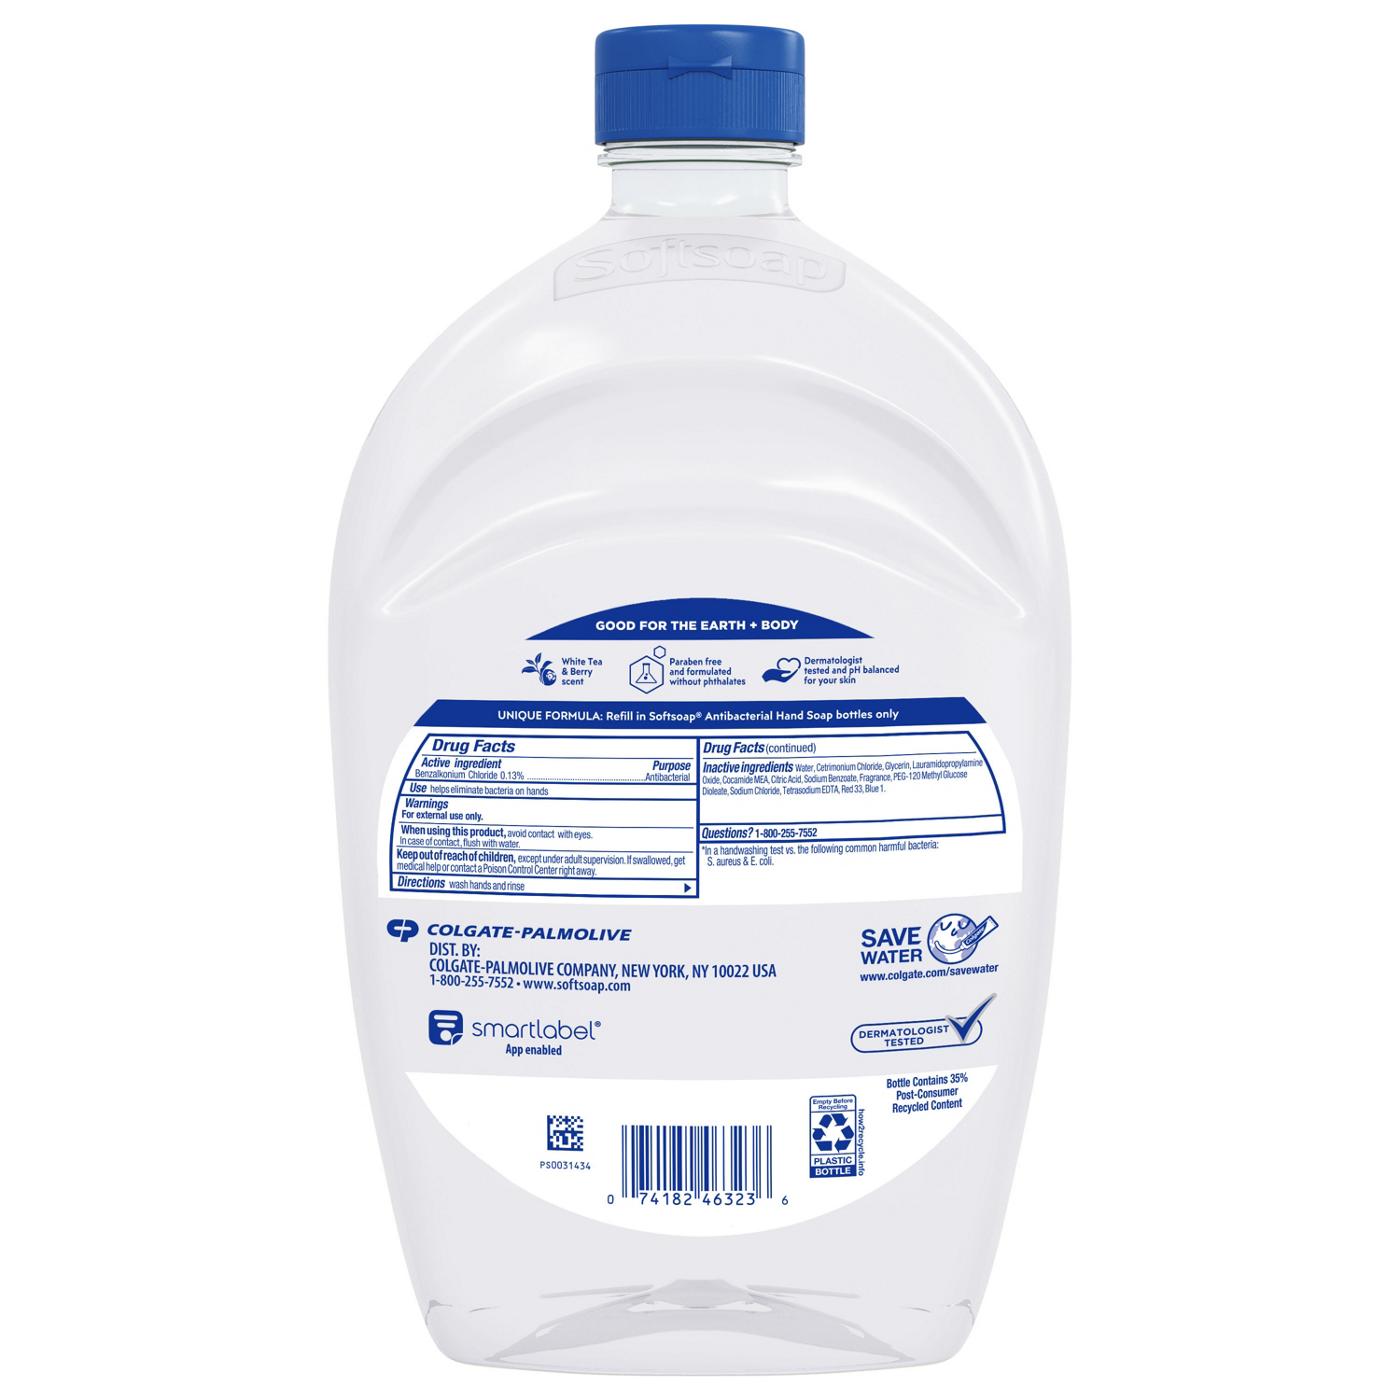 Softsoap Antibacterial Refill Hand Soap - White Tea & Berry; image 2 of 8